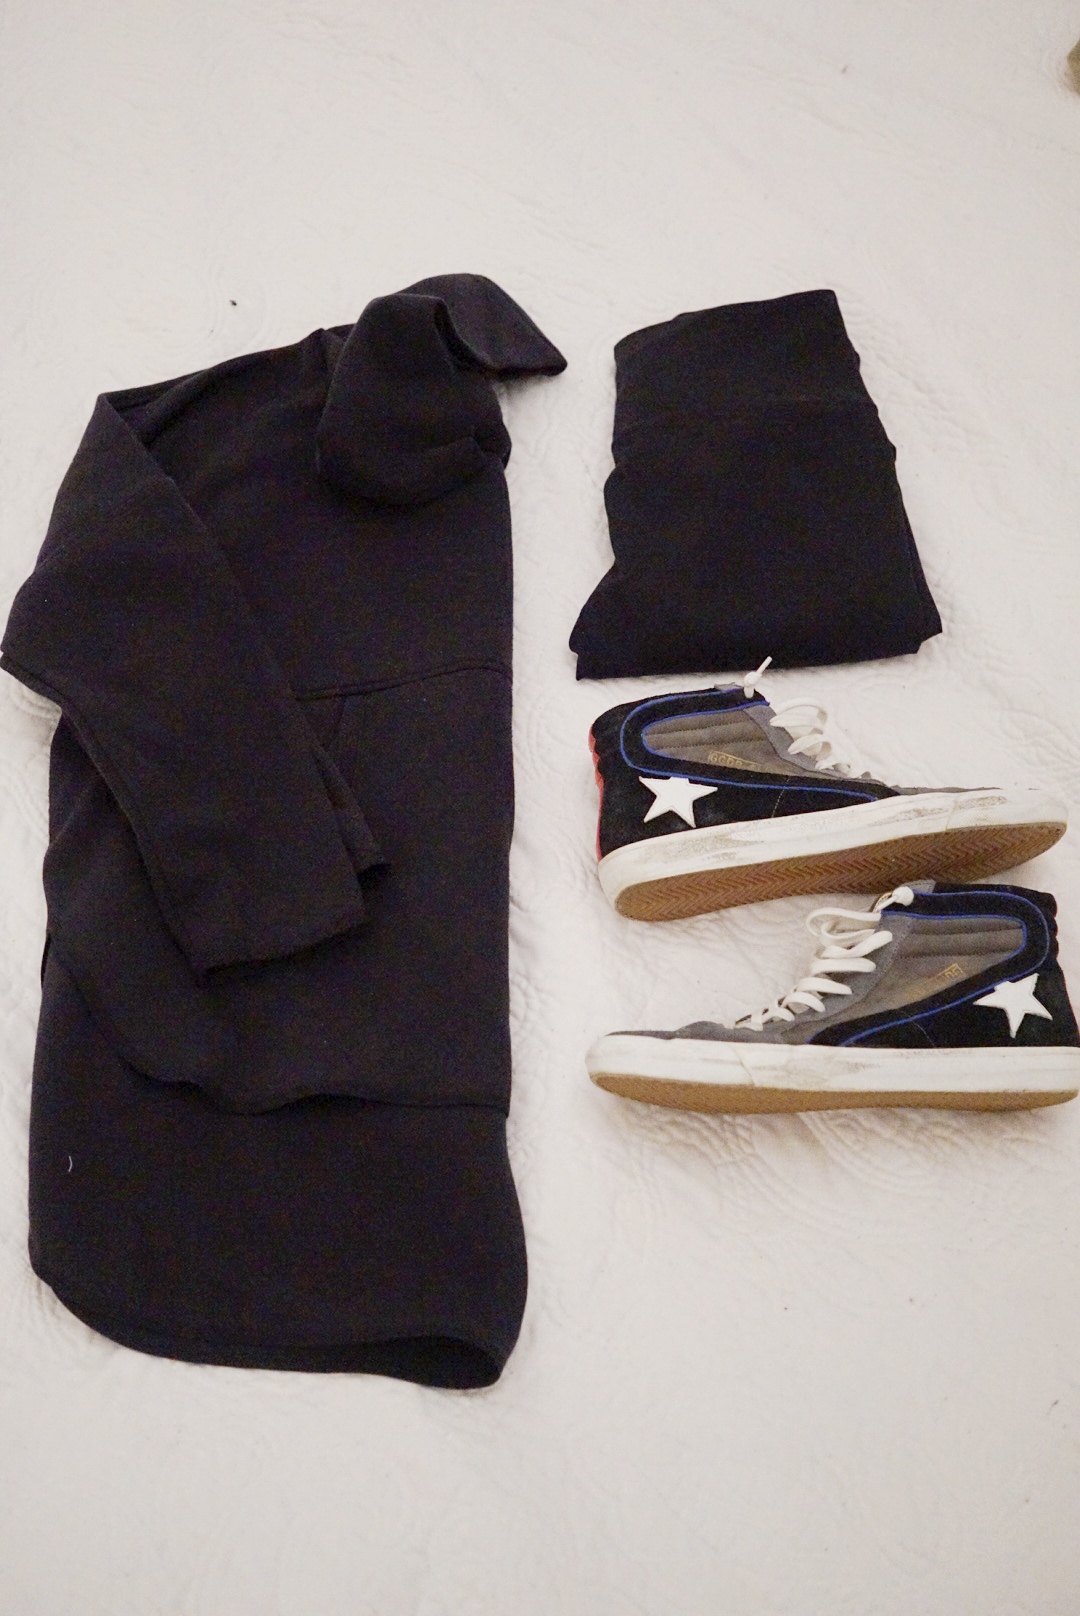 Winter Capsule Wardrobe | What I packed for a long trip